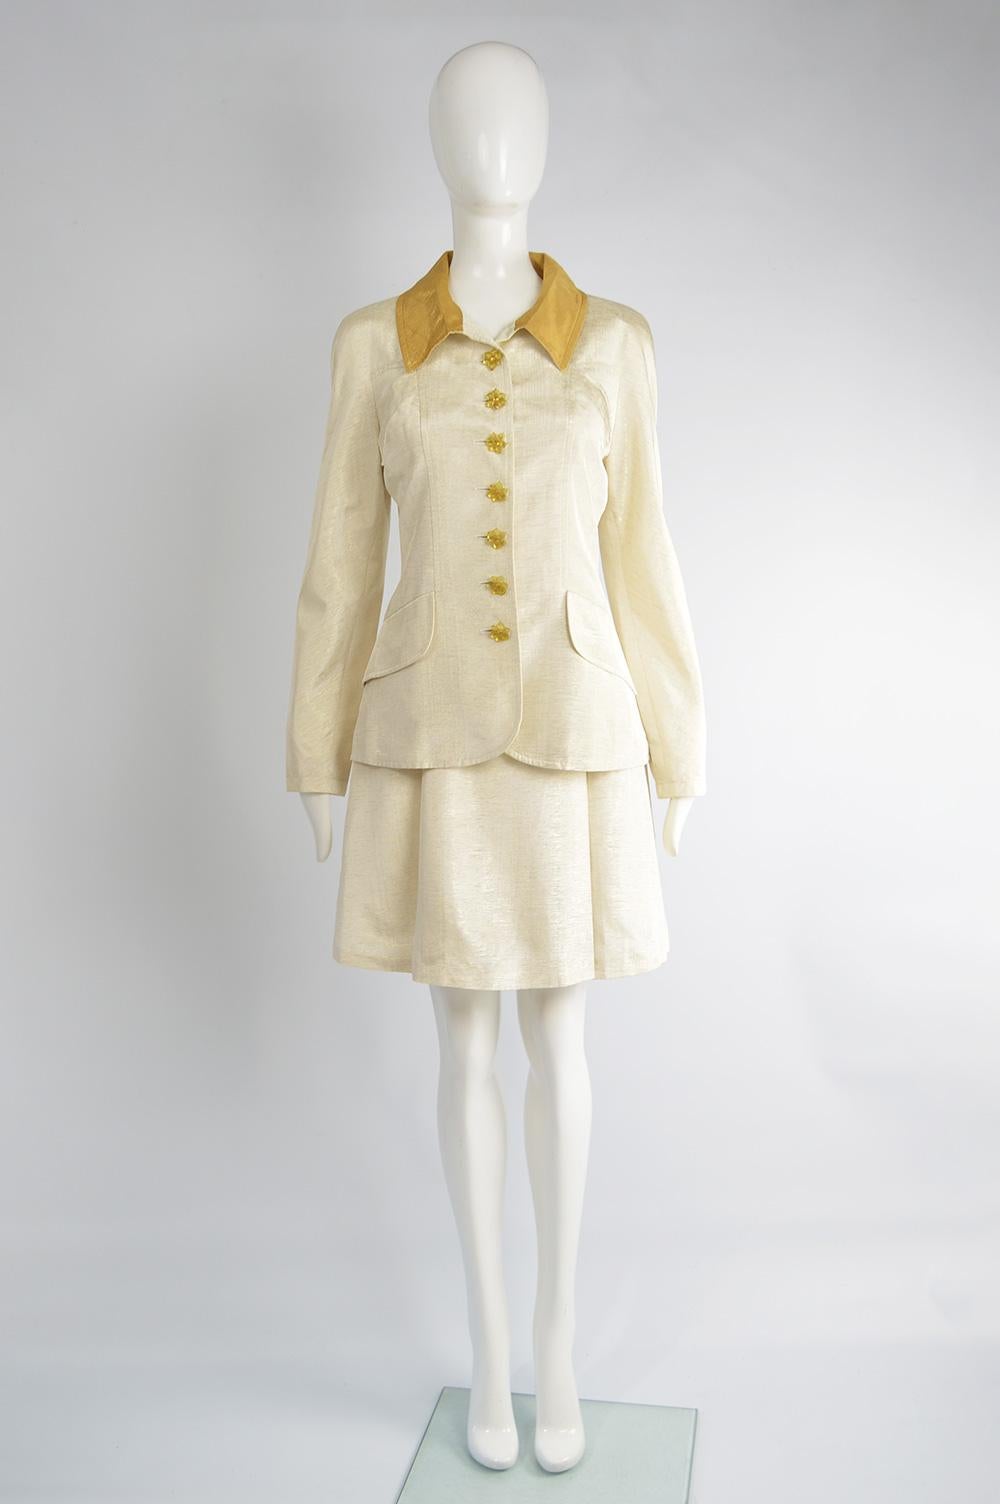 A fabulous vintage women's Christian Lacroix 2 piece skirt ensemble from the 90s. In an ivory coloured faille with a gold lamé collar and lucite buttons on the longline jacket and a matching high waisted skirt. Perfect for a party or as an unusual